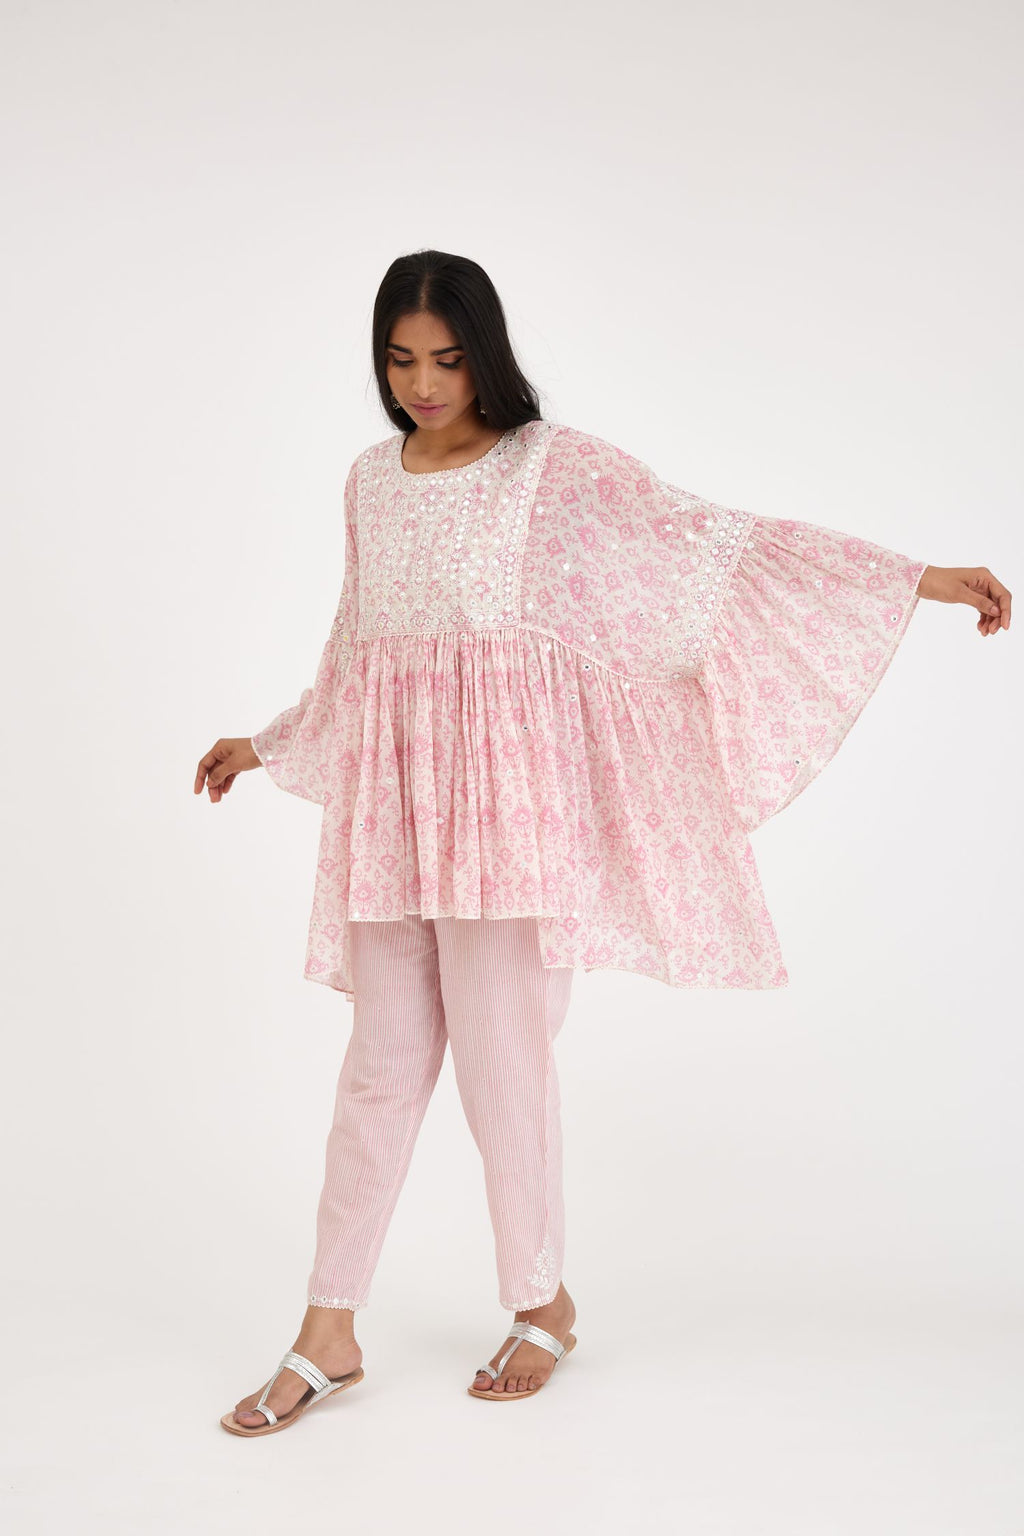 Ikat design pink and off white hand block printed cotton easy fit top with flared sleeves and hem, paired with hand-block printed striped Cotton comfortable fit pant with all-over elasticated waisband.